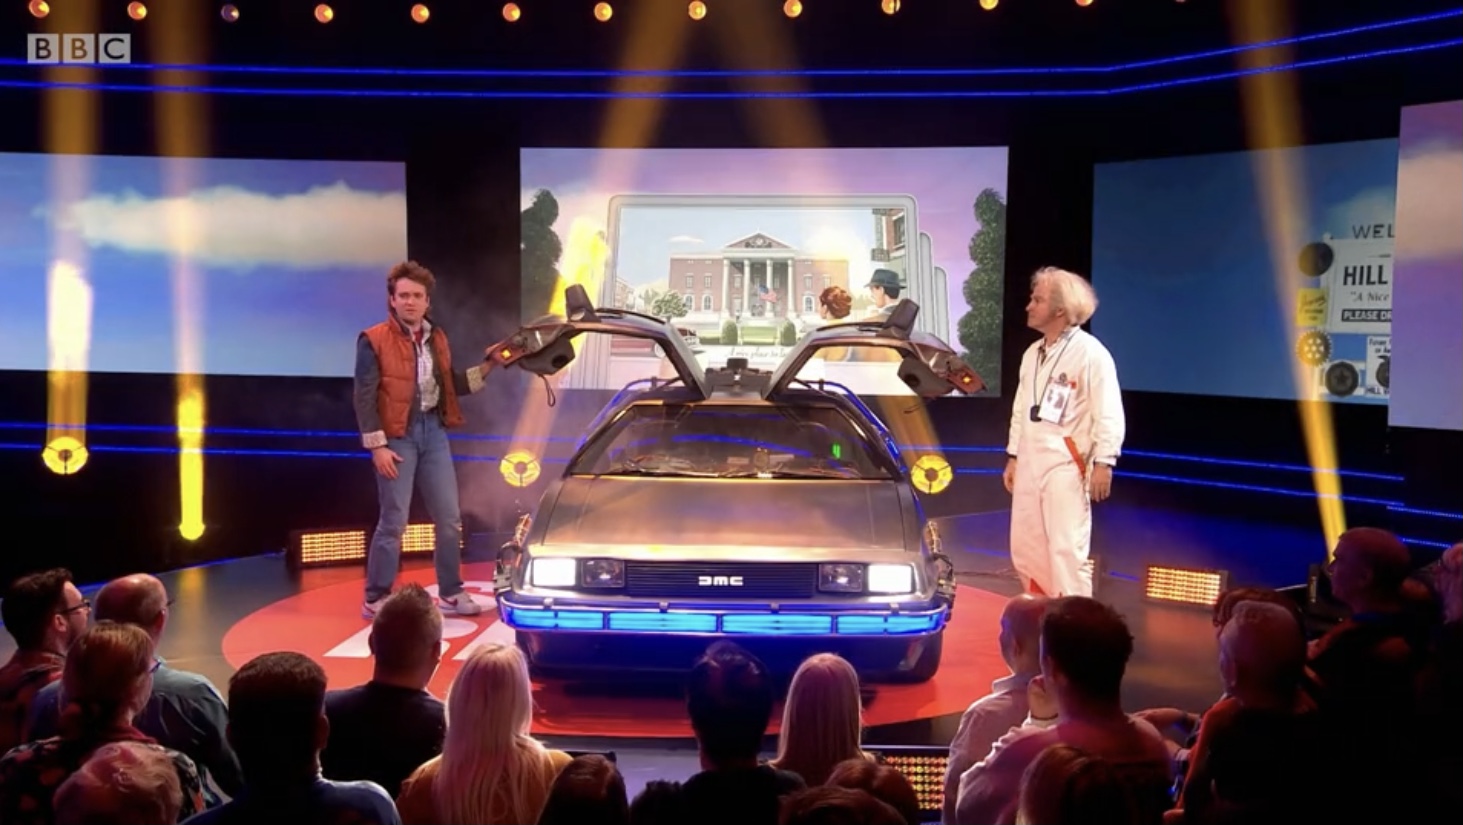 BTTF Car along side the Back to the Future the Musical on Sports Relief 2020 Live on BBC 1